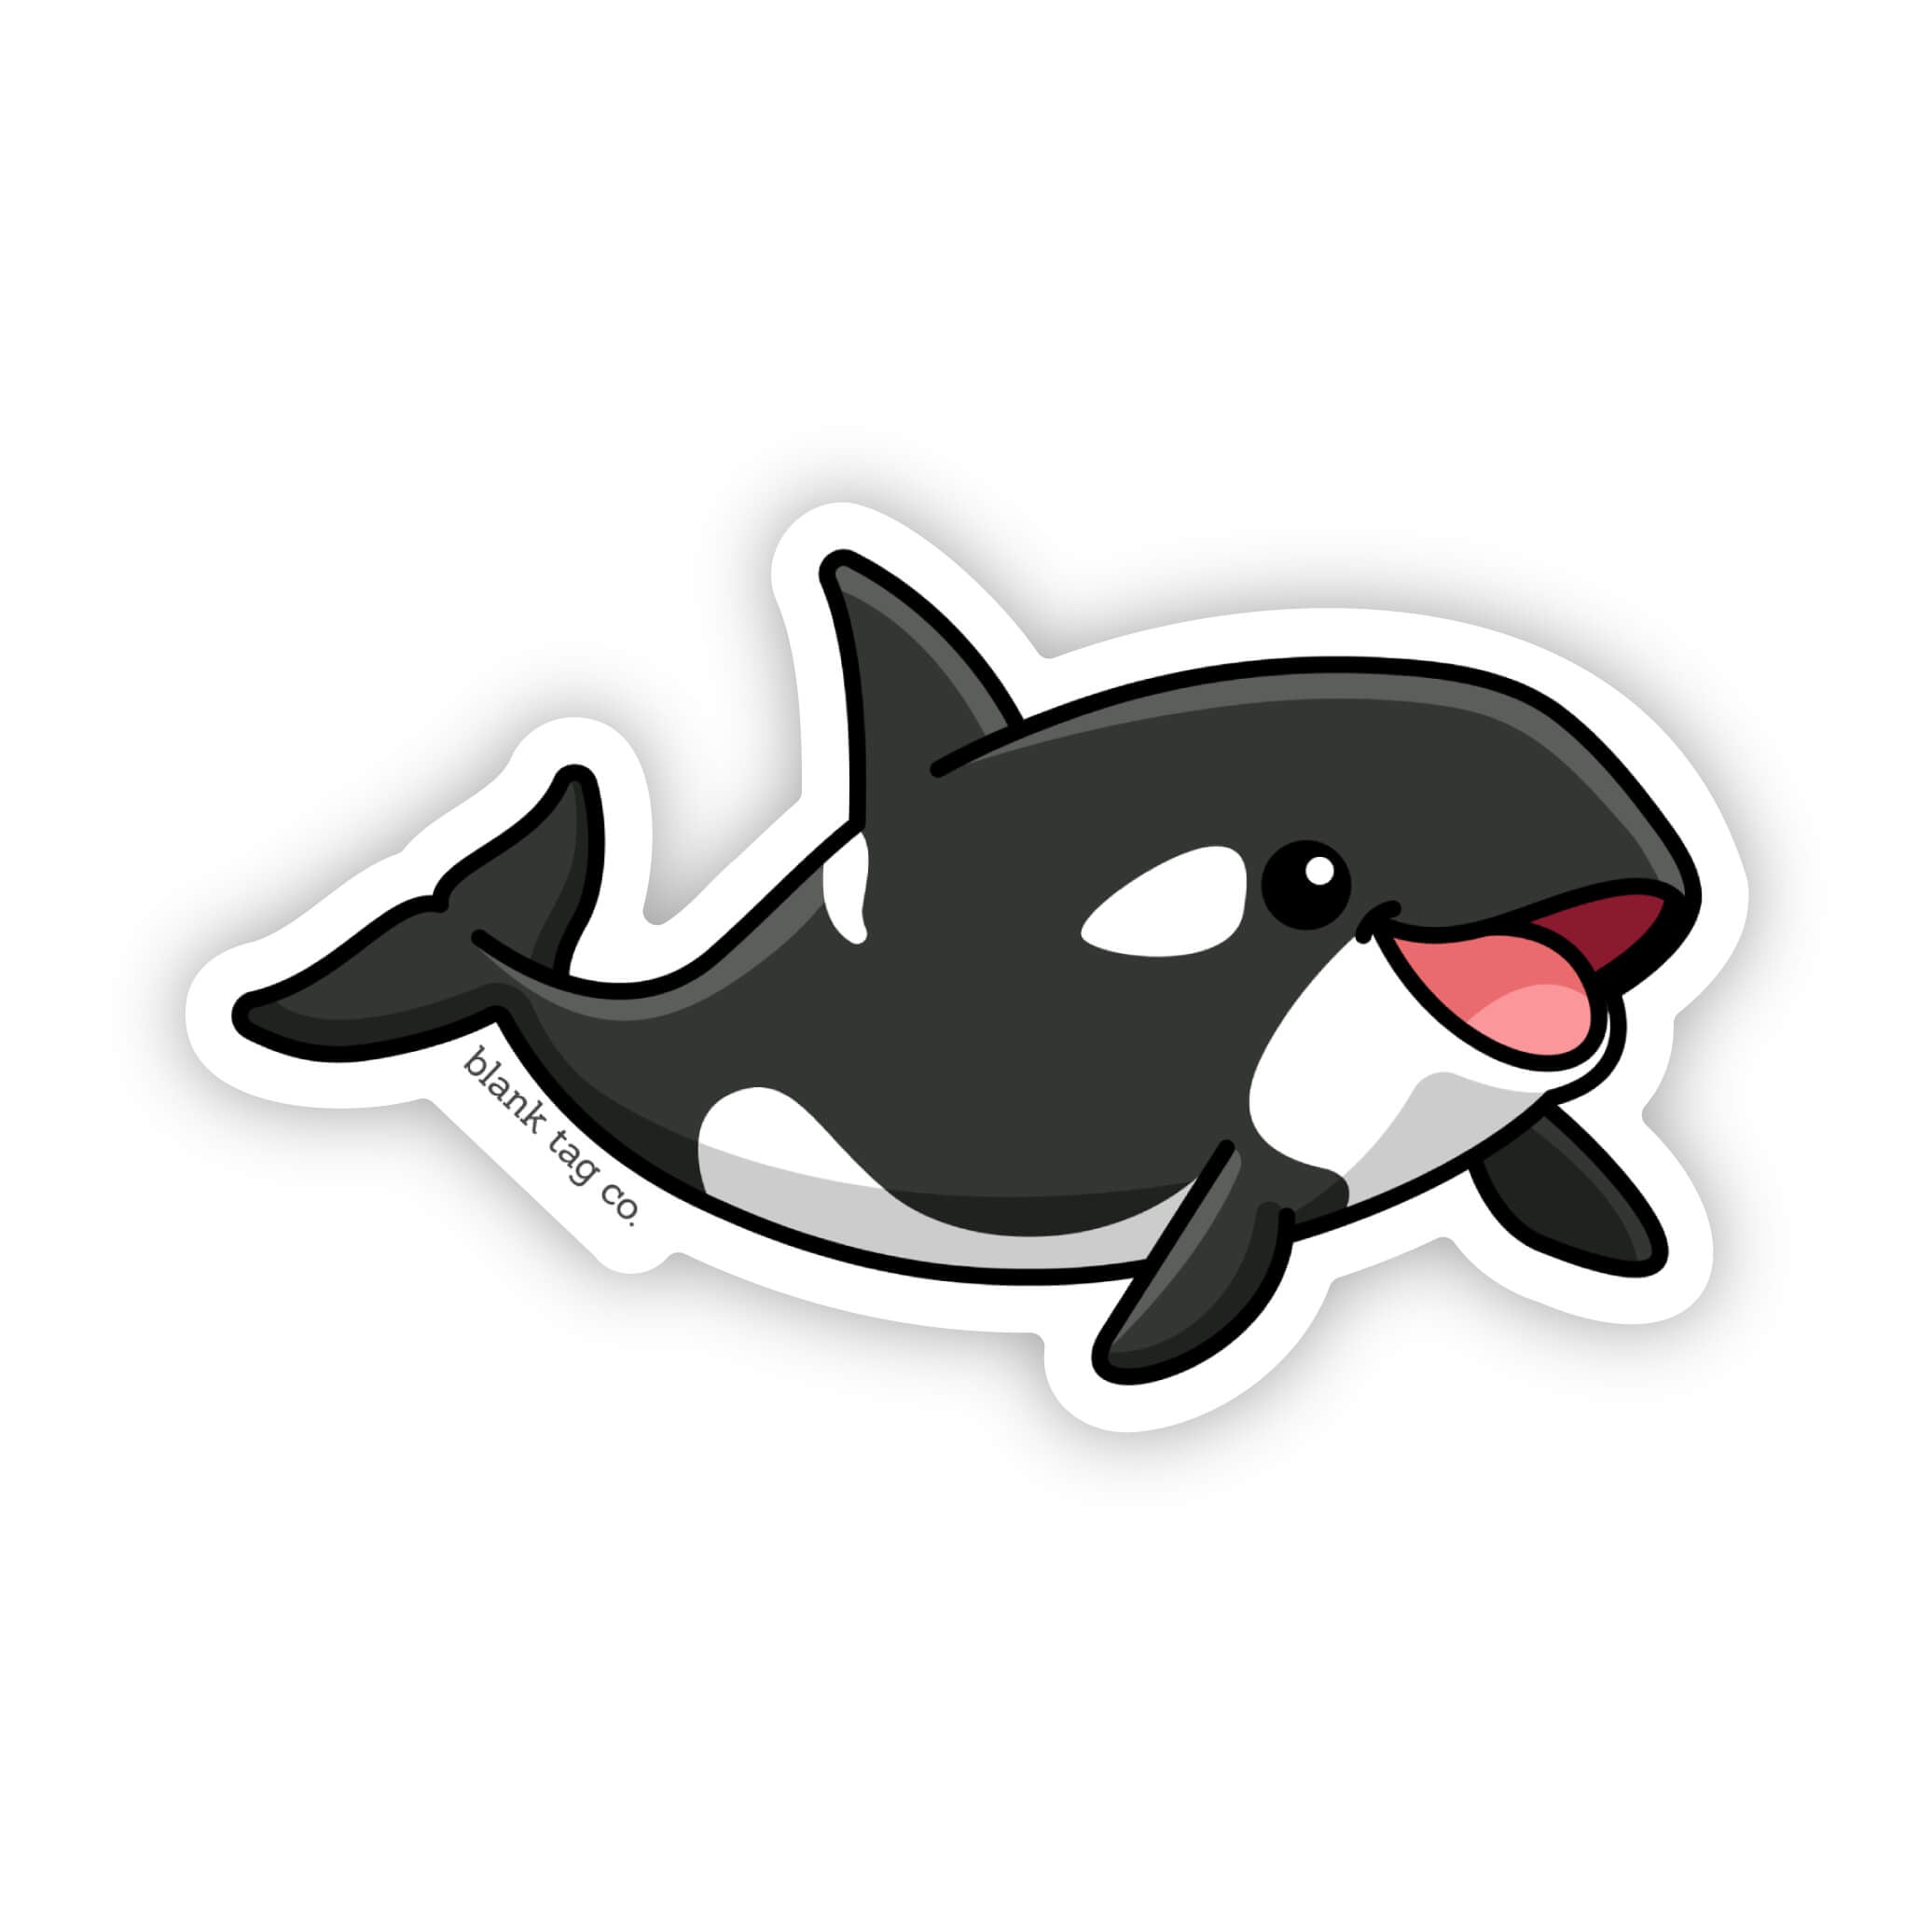 The Orca Whale Sticker